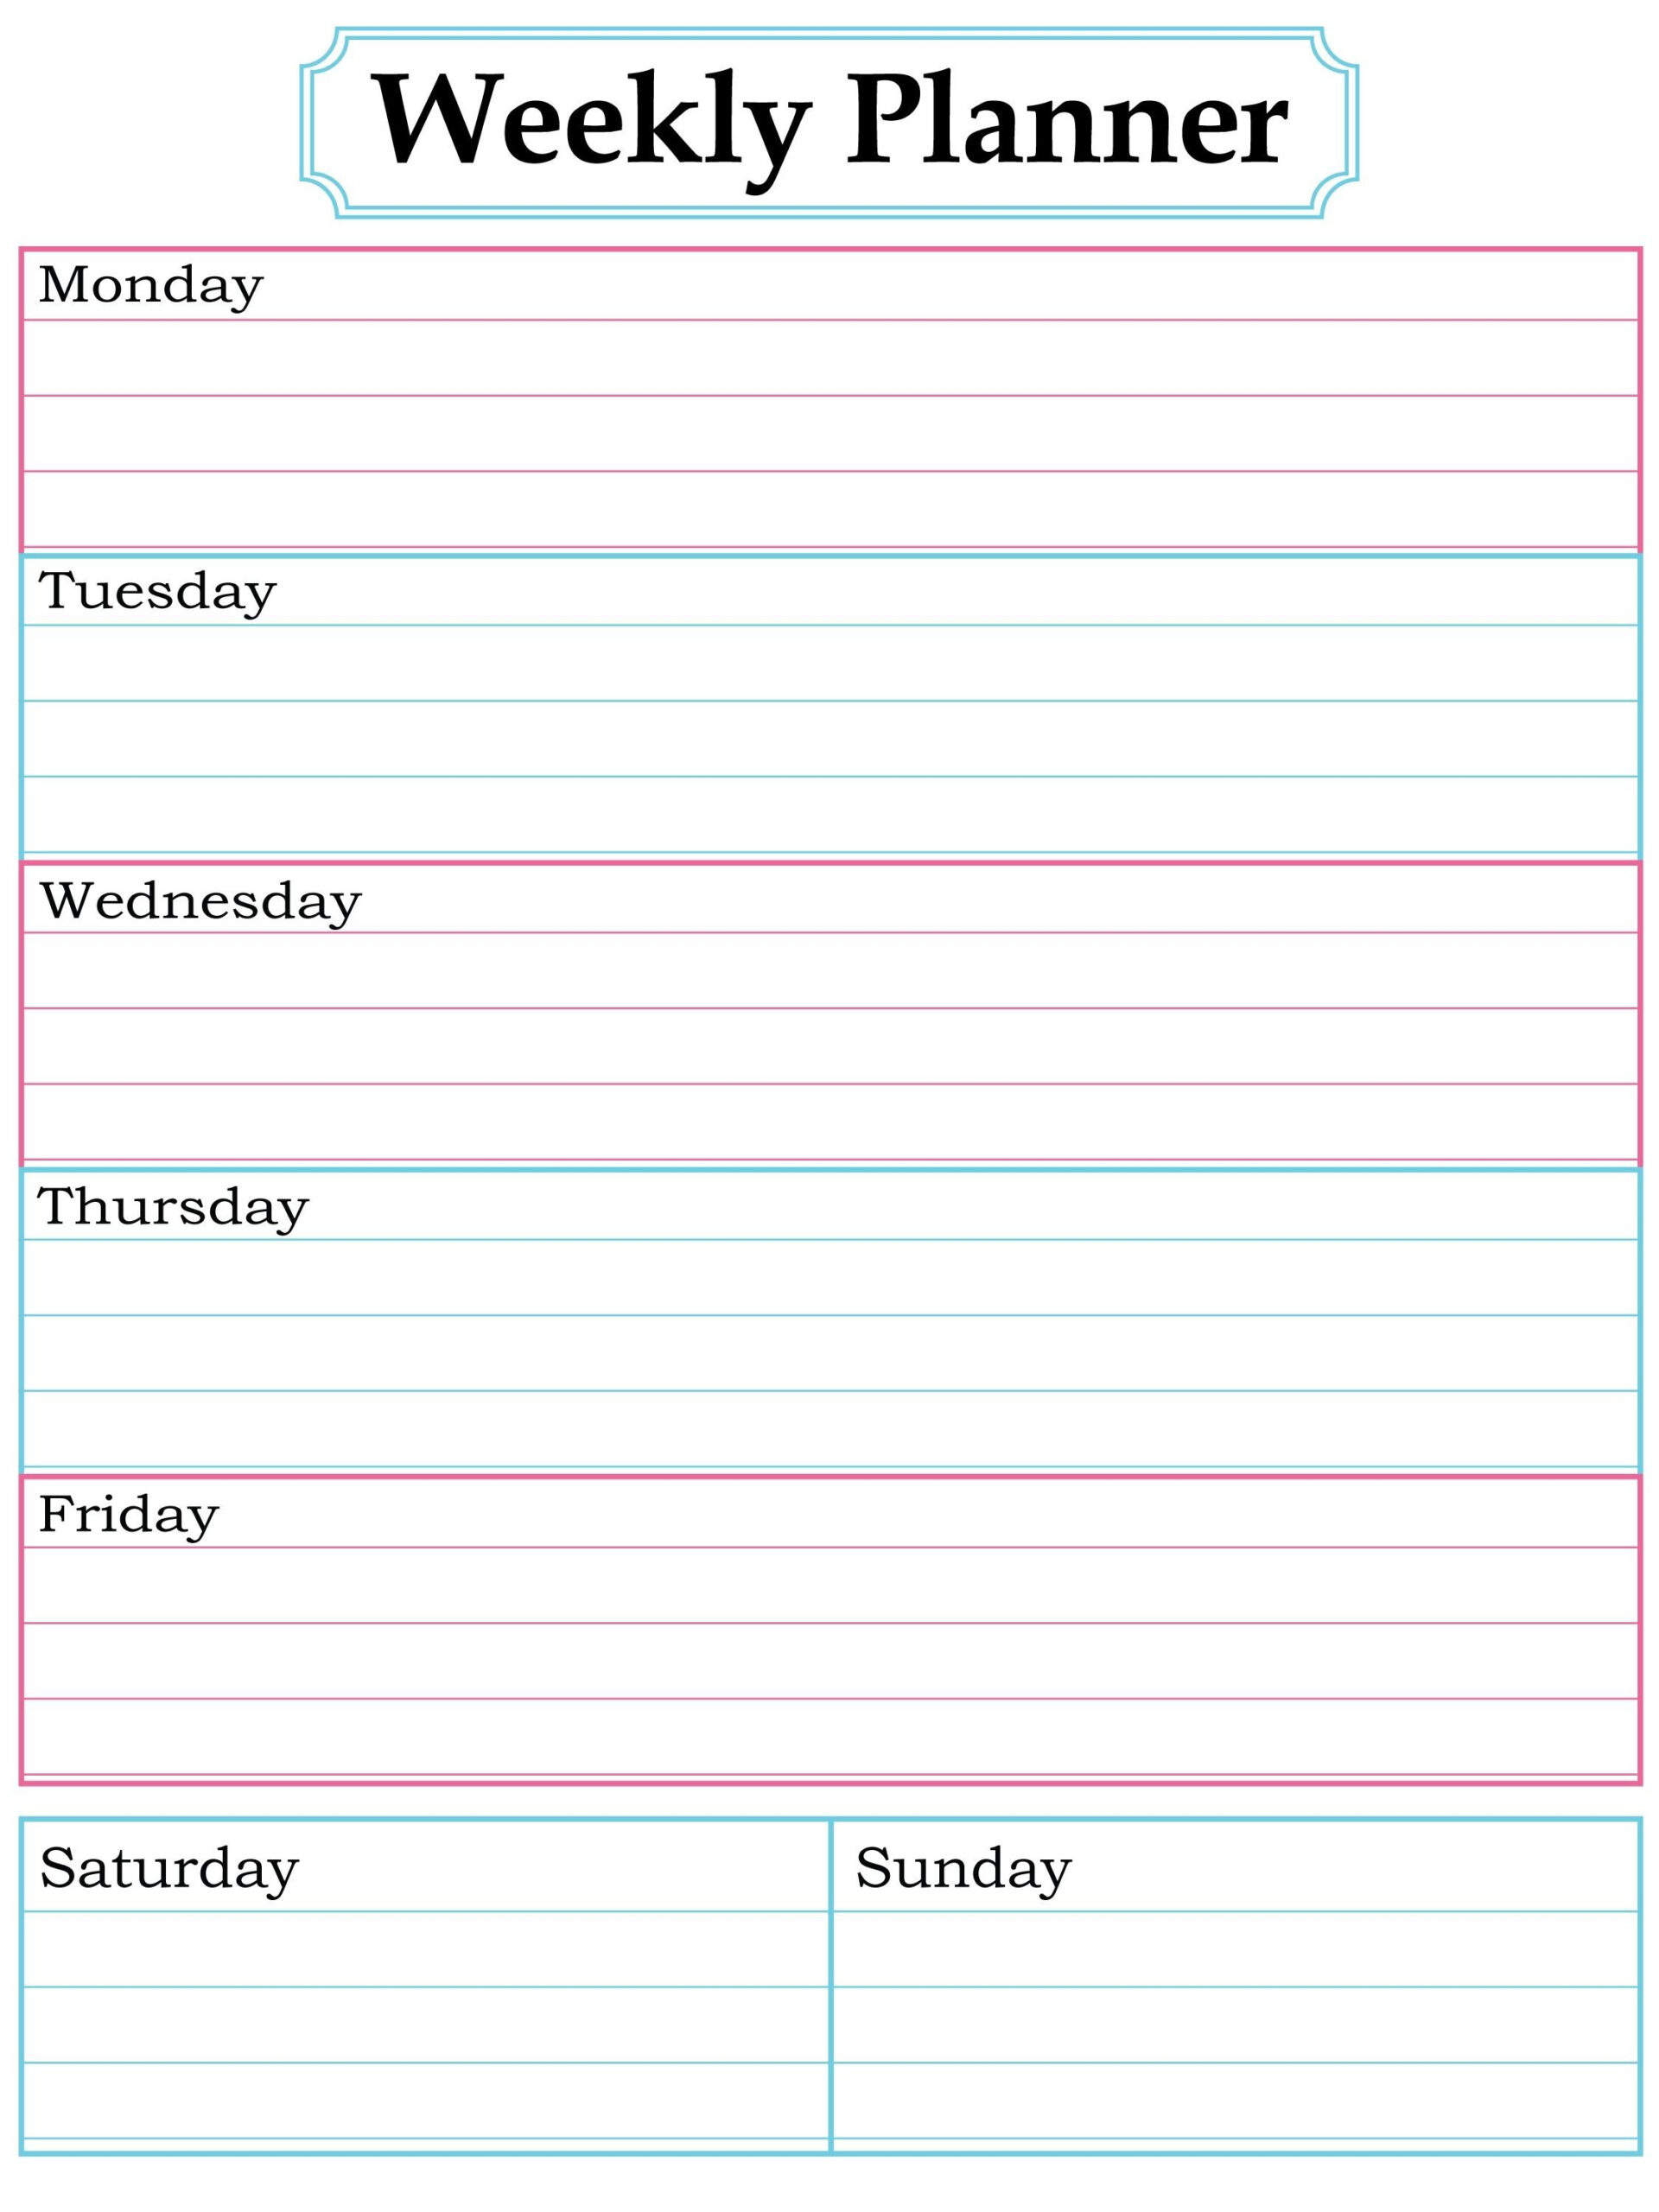 free weekly schedule tes for word and blank printable